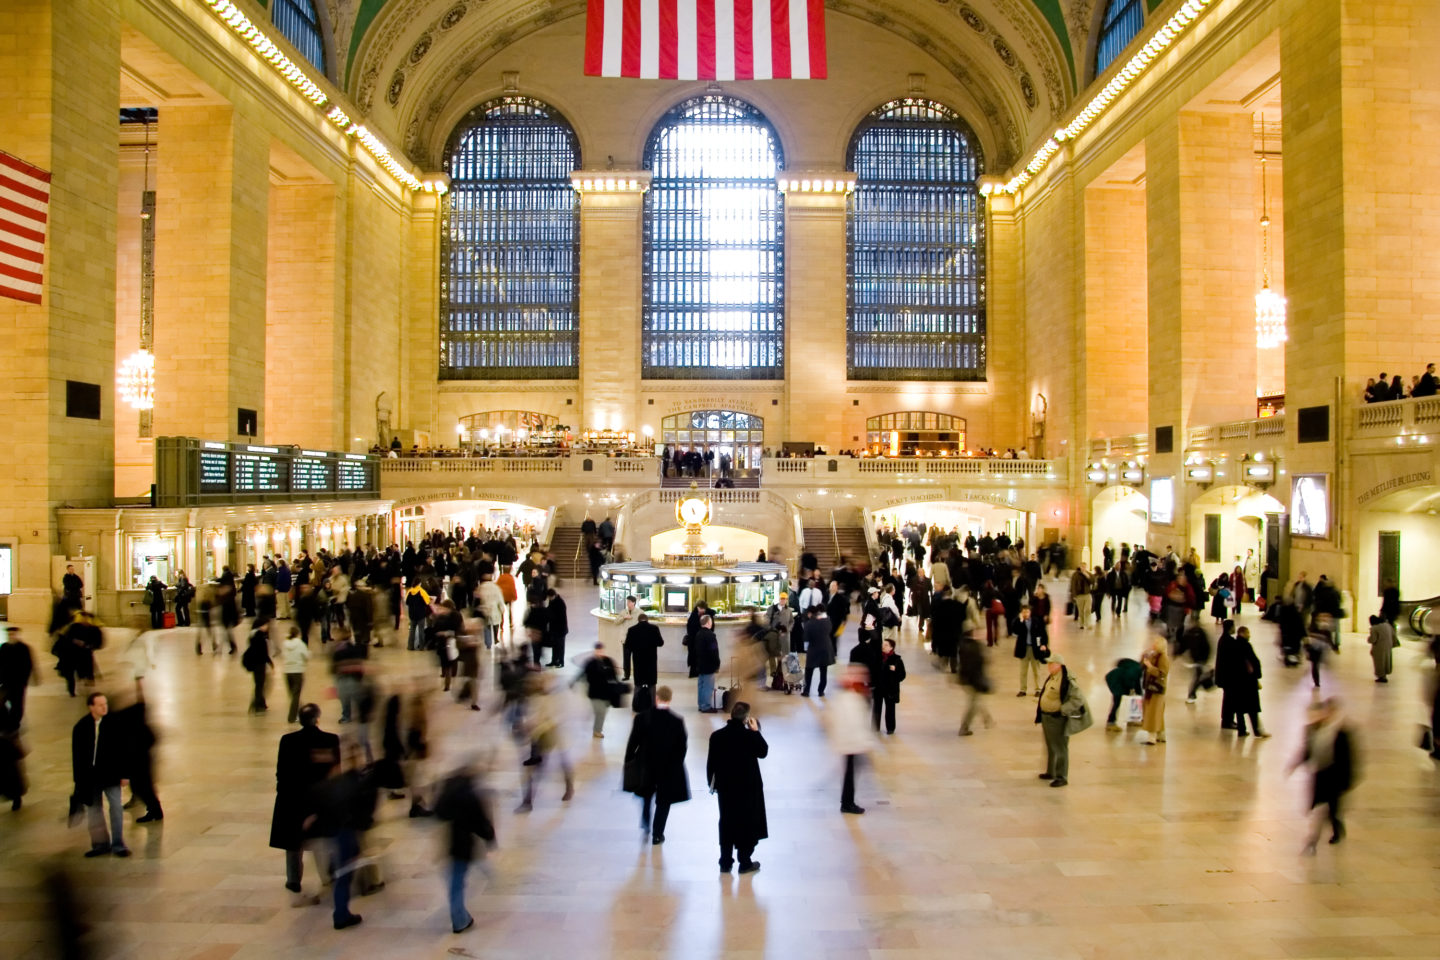 Interior of crowded Grand Central Terminal in New York